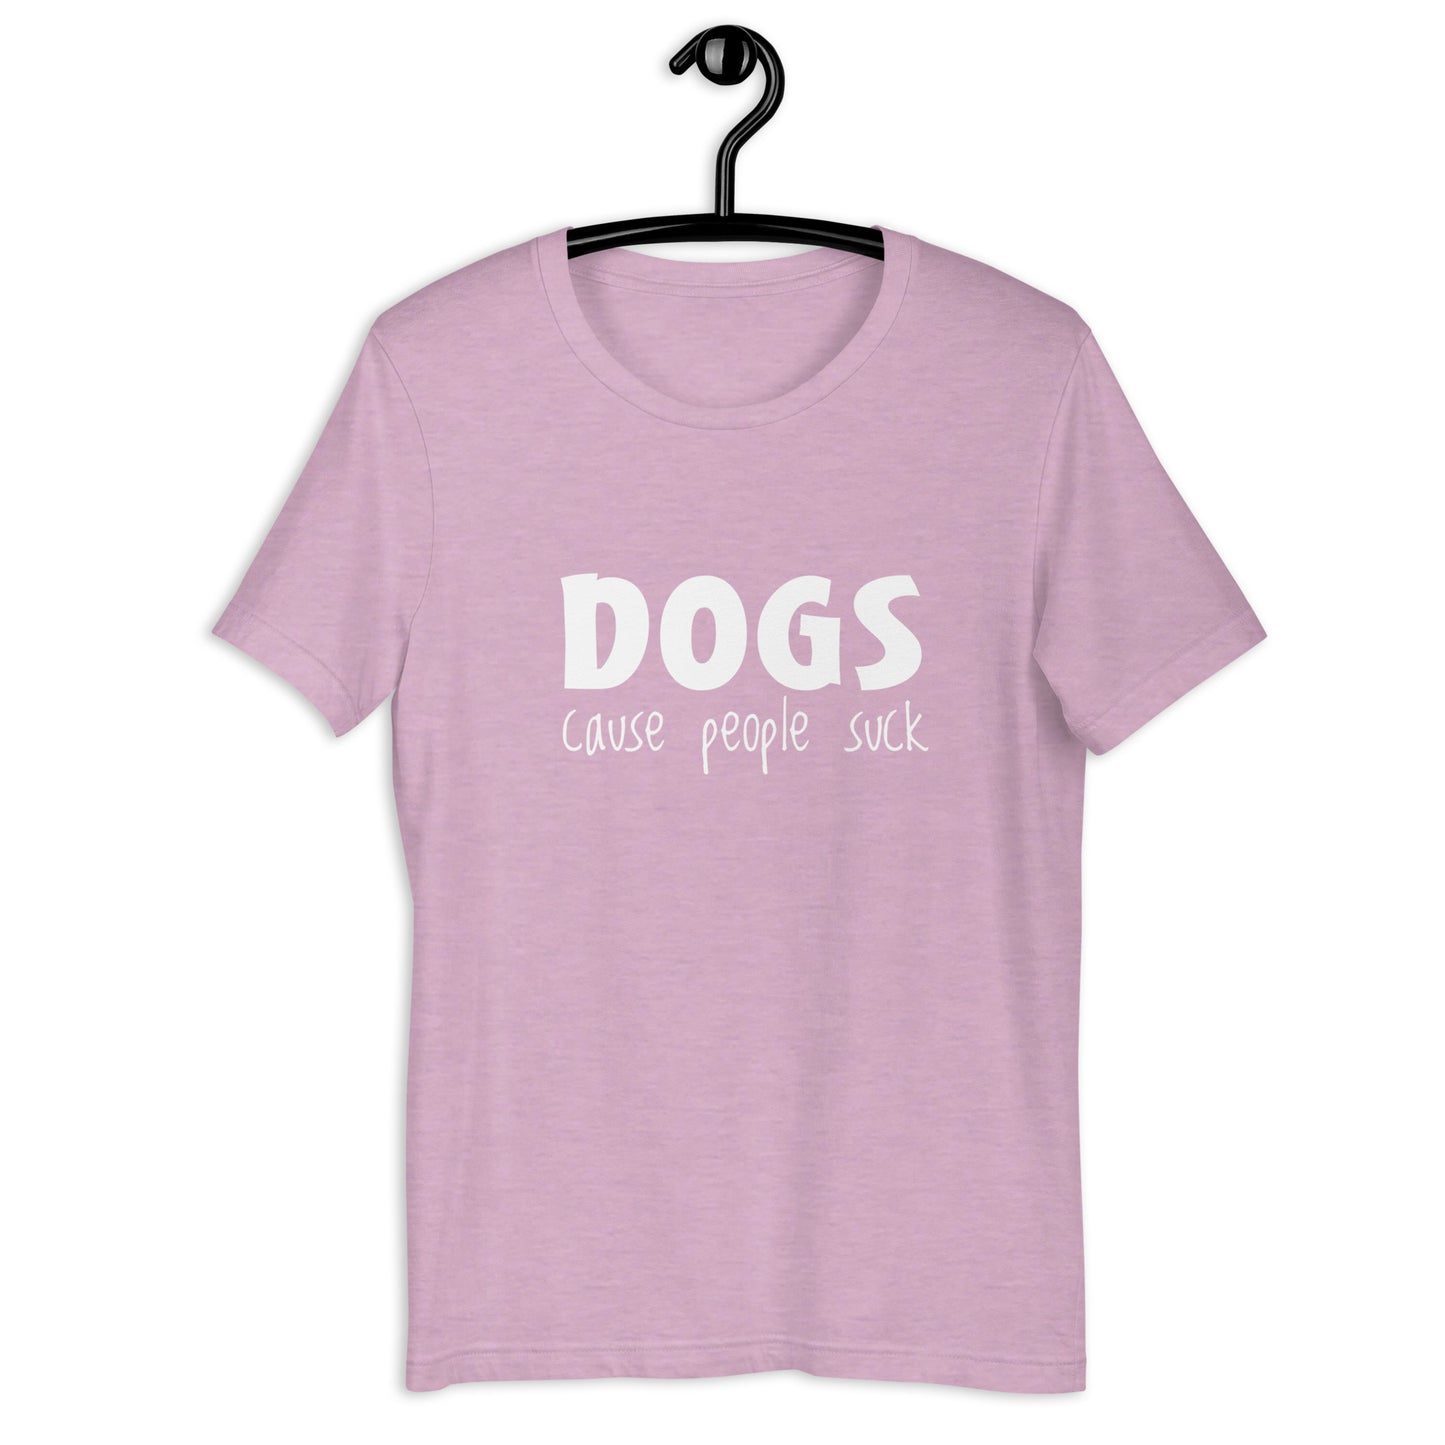 DOGS CAUSE PEOPLE SUCK - Unisex t-shirt